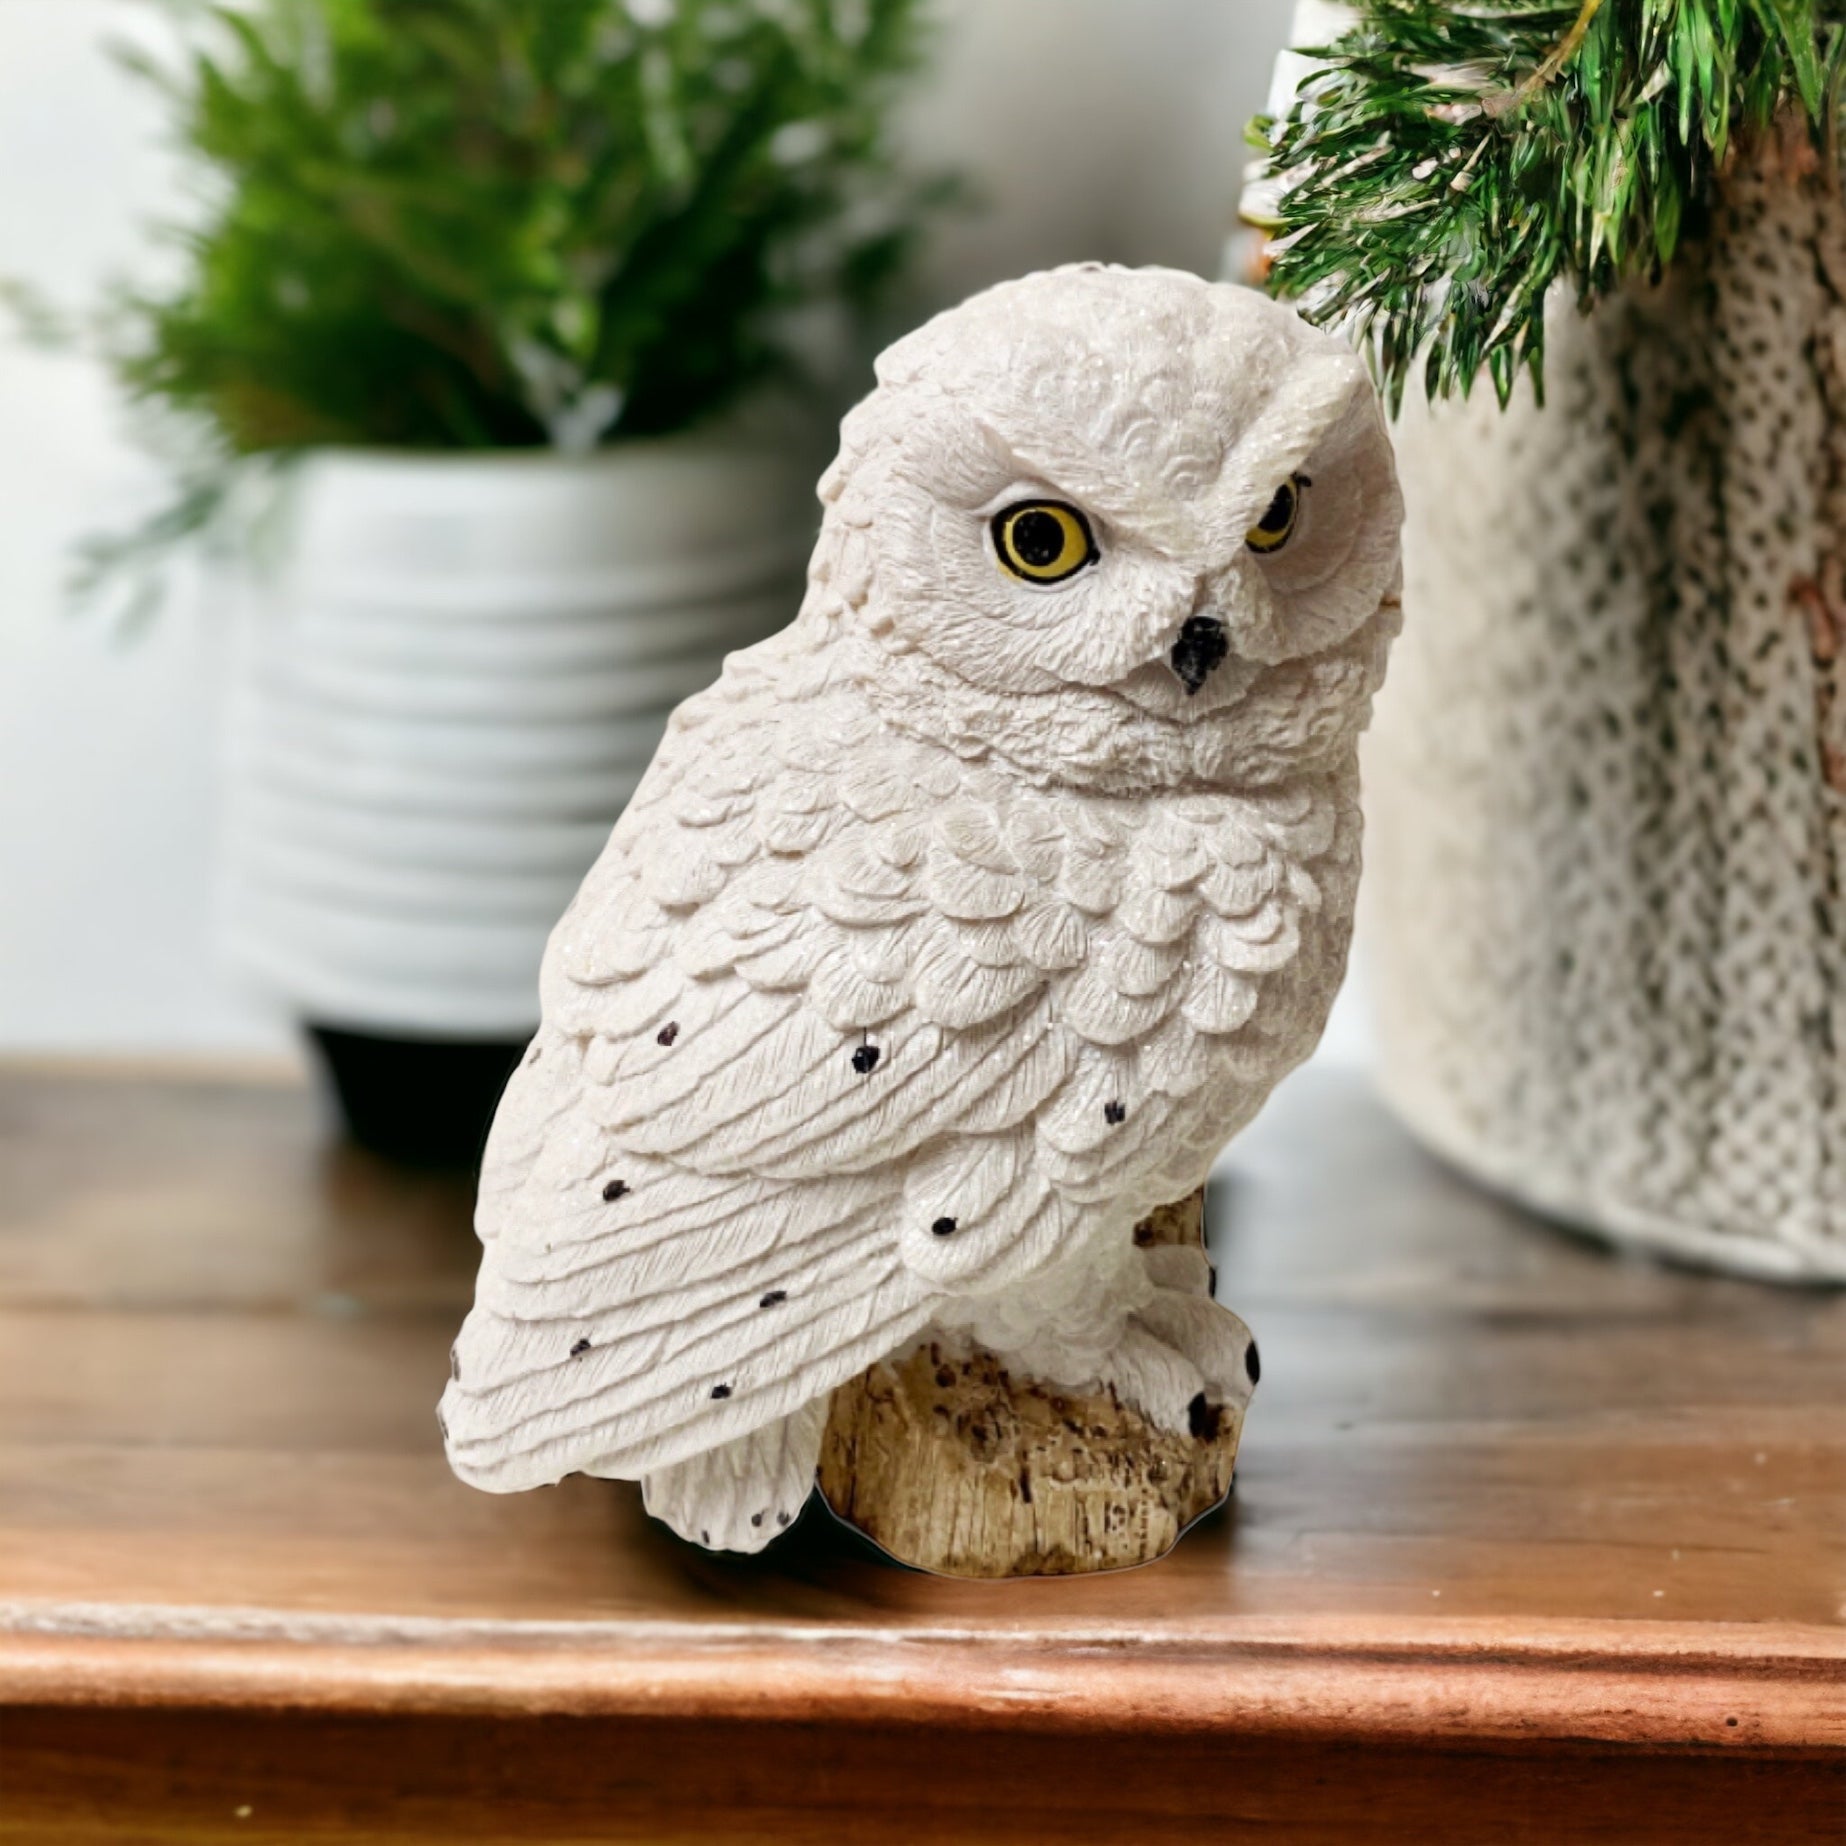 Owl Realistic Mystic Bird Ornament - The Renmy Store Homewares & Gifts 